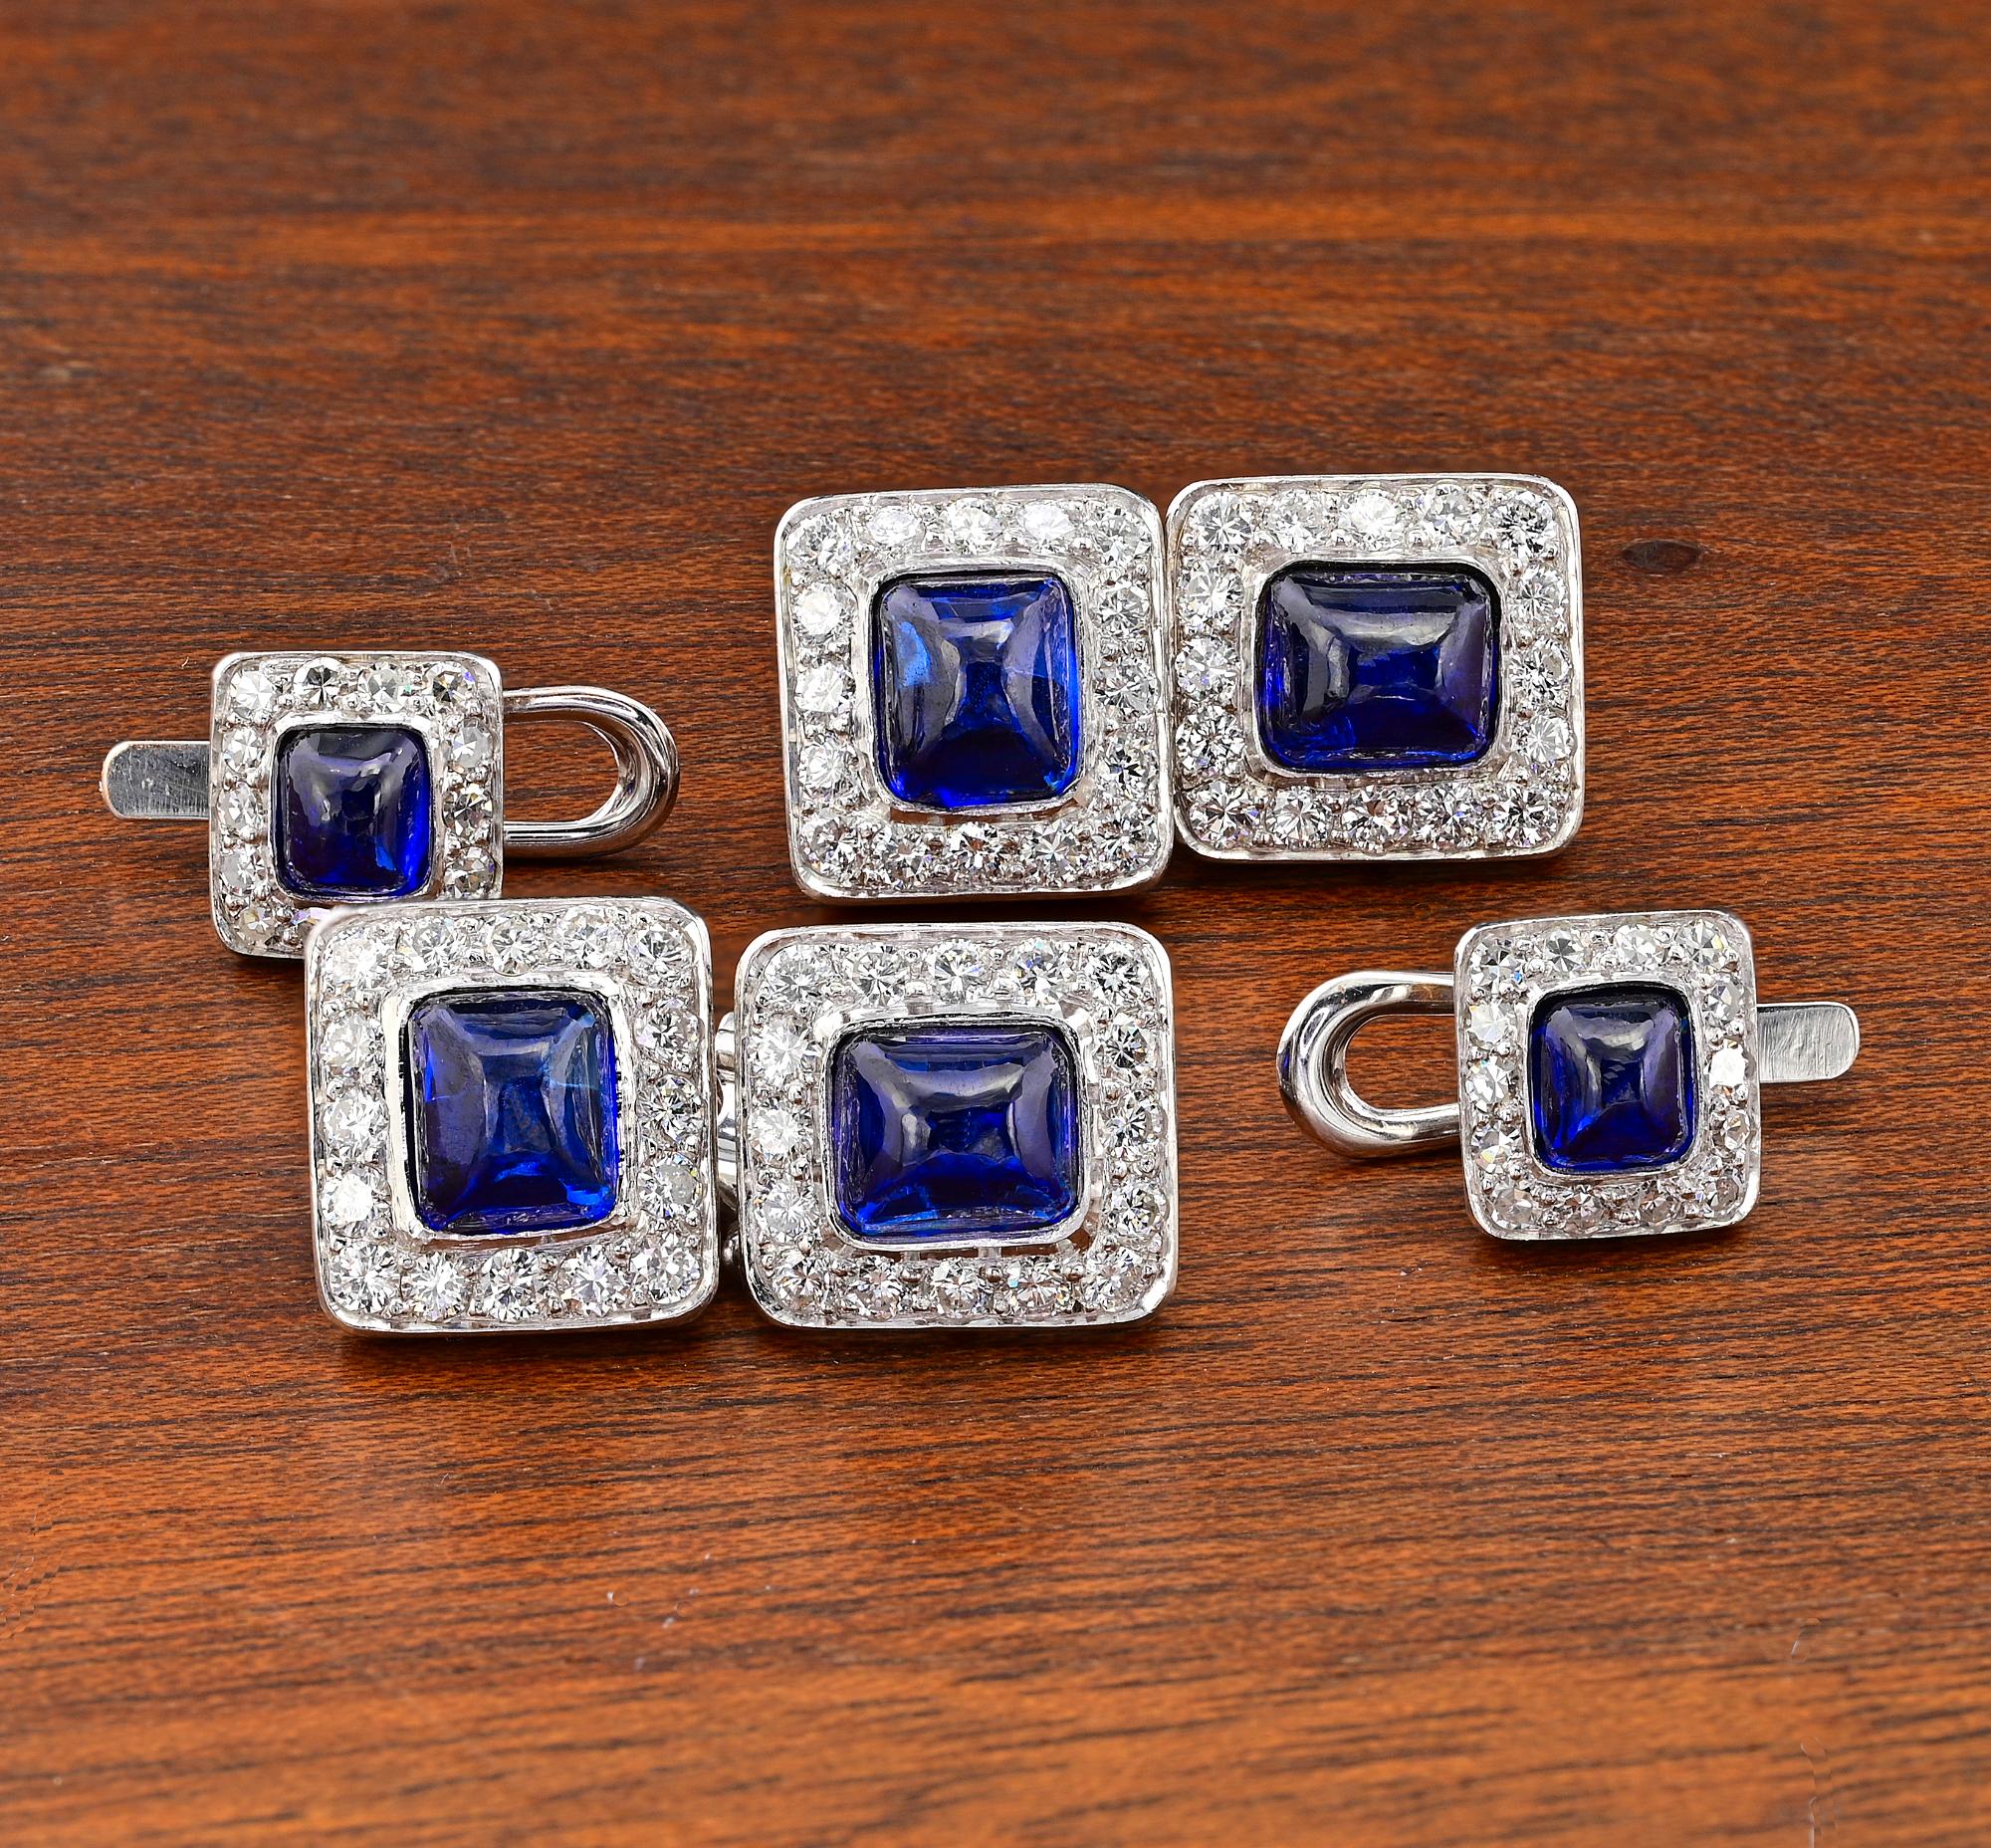 Elegant 1970 circa Italian tuxedo cufflinks suite set with natural Sapphire and Diamonds, hand crafted of solid Platinum
Chic timeless design set with 6 Royal Blue color natural Sapphires, Sugar Loaf cut for a total of 11.40 Ct
Surrounded by 2.50 Ct